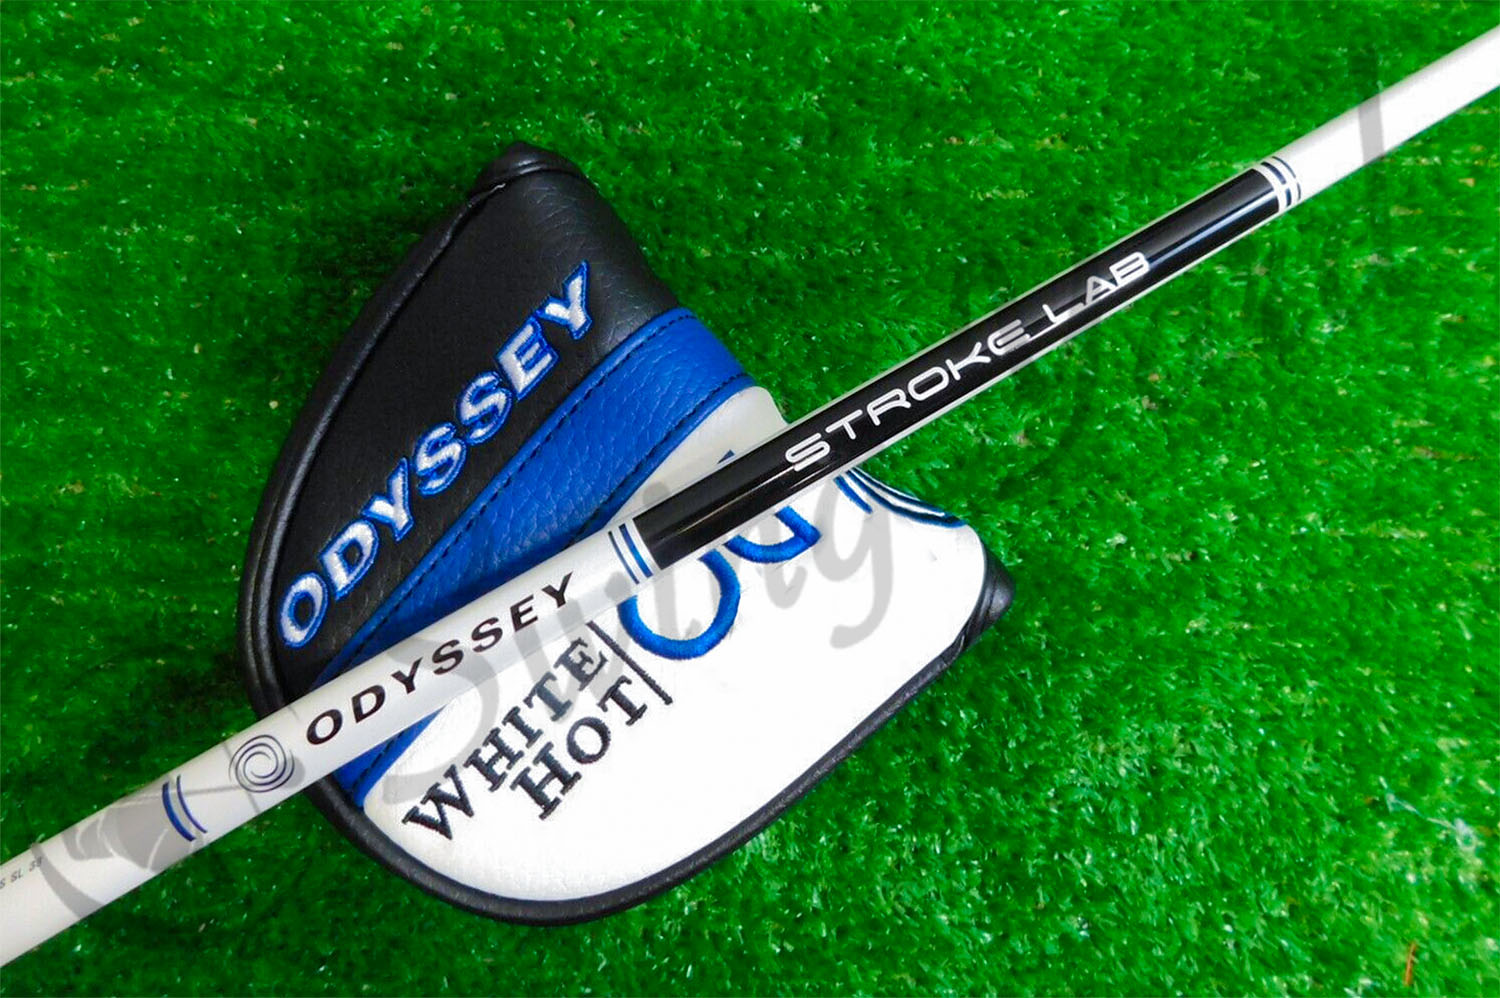 A Stroke Lab shaft of Odyssey White Hot OG 7 Putter at the golf course